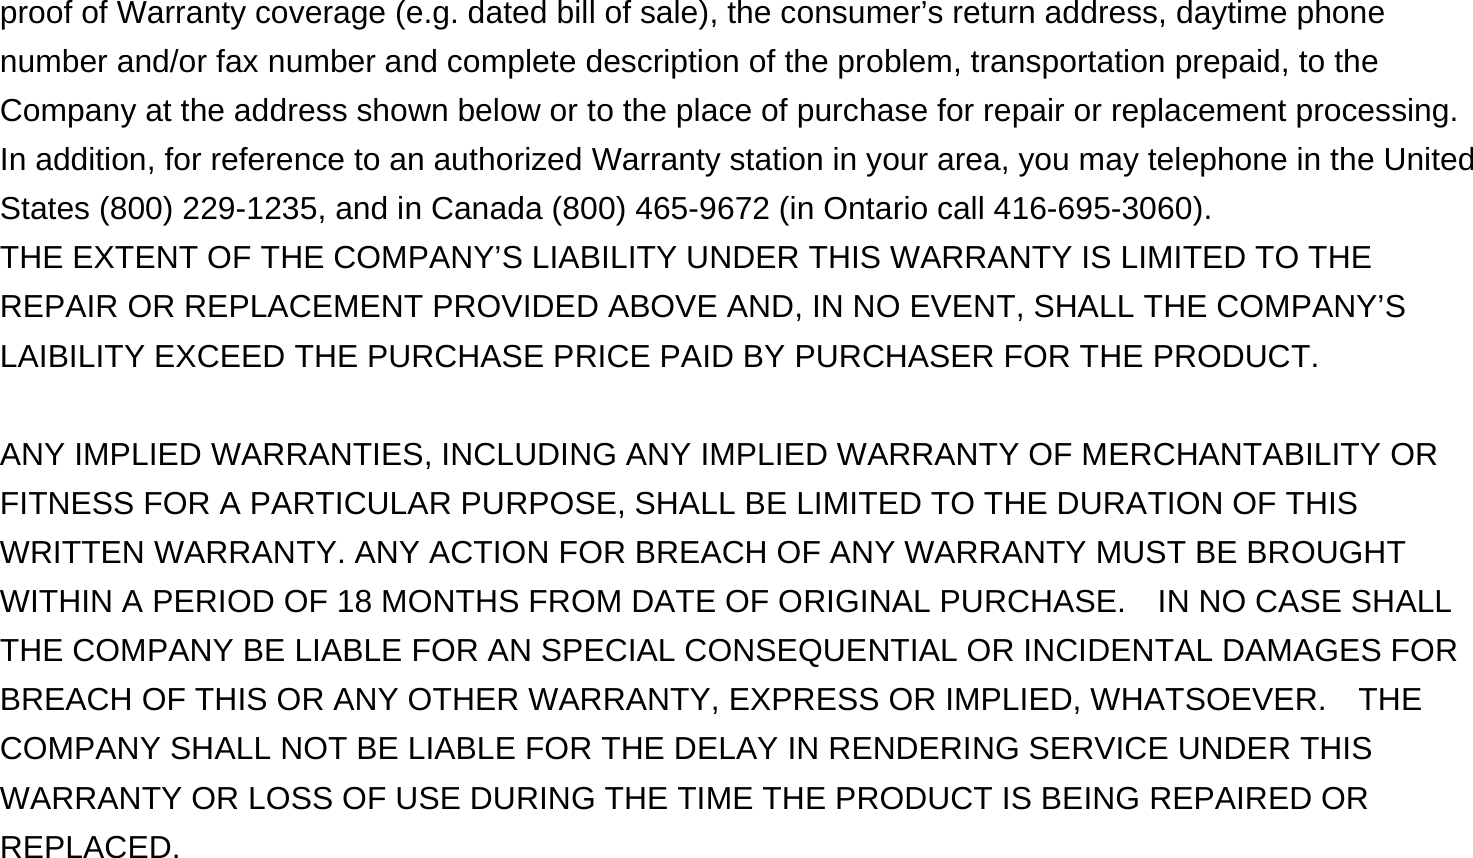 proof of Warranty coverage (e.g. dated bill of sale), the consumer’s return address, daytime phone number and/or fax number and complete description of the problem, transportation prepaid, to the Company at the address shown below or to the place of purchase for repair or replacement processing.   In addition, for reference to an authorized Warranty station in your area, you may telephone in the United States (800) 229-1235, and in Canada (800) 465-9672 (in Ontario call 416-695-3060). THE EXTENT OF THE COMPANY’S LIABILITY UNDER THIS WARRANTY IS LIMITED TO THE REPAIR OR REPLACEMENT PROVIDED ABOVE AND, IN NO EVENT, SHALL THE COMPANY’S LAIBILITY EXCEED THE PURCHASE PRICE PAID BY PURCHASER FOR THE PRODUCT.  ANY IMPLIED WARRANTIES, INCLUDING ANY IMPLIED WARRANTY OF MERCHANTABILITY OR FITNESS FOR A PARTICULAR PURPOSE, SHALL BE LIMITED TO THE DURATION OF THIS WRITTEN WARRANTY. ANY ACTION FOR BREACH OF ANY WARRANTY MUST BE BROUGHT WITHIN A PERIOD OF 18 MONTHS FROM DATE OF ORIGINAL PURCHASE.    IN NO CASE SHALL THE COMPANY BE LIABLE FOR AN SPECIAL CONSEQUENTIAL OR INCIDENTAL DAMAGES FOR BREACH OF THIS OR ANY OTHER WARRANTY, EXPRESS OR IMPLIED, WHATSOEVER.    THE COMPANY SHALL NOT BE LIABLE FOR THE DELAY IN RENDERING SERVICE UNDER THIS WARRANTY OR LOSS OF USE DURING THE TIME THE PRODUCT IS BEING REPAIRED OR REPLACED.  